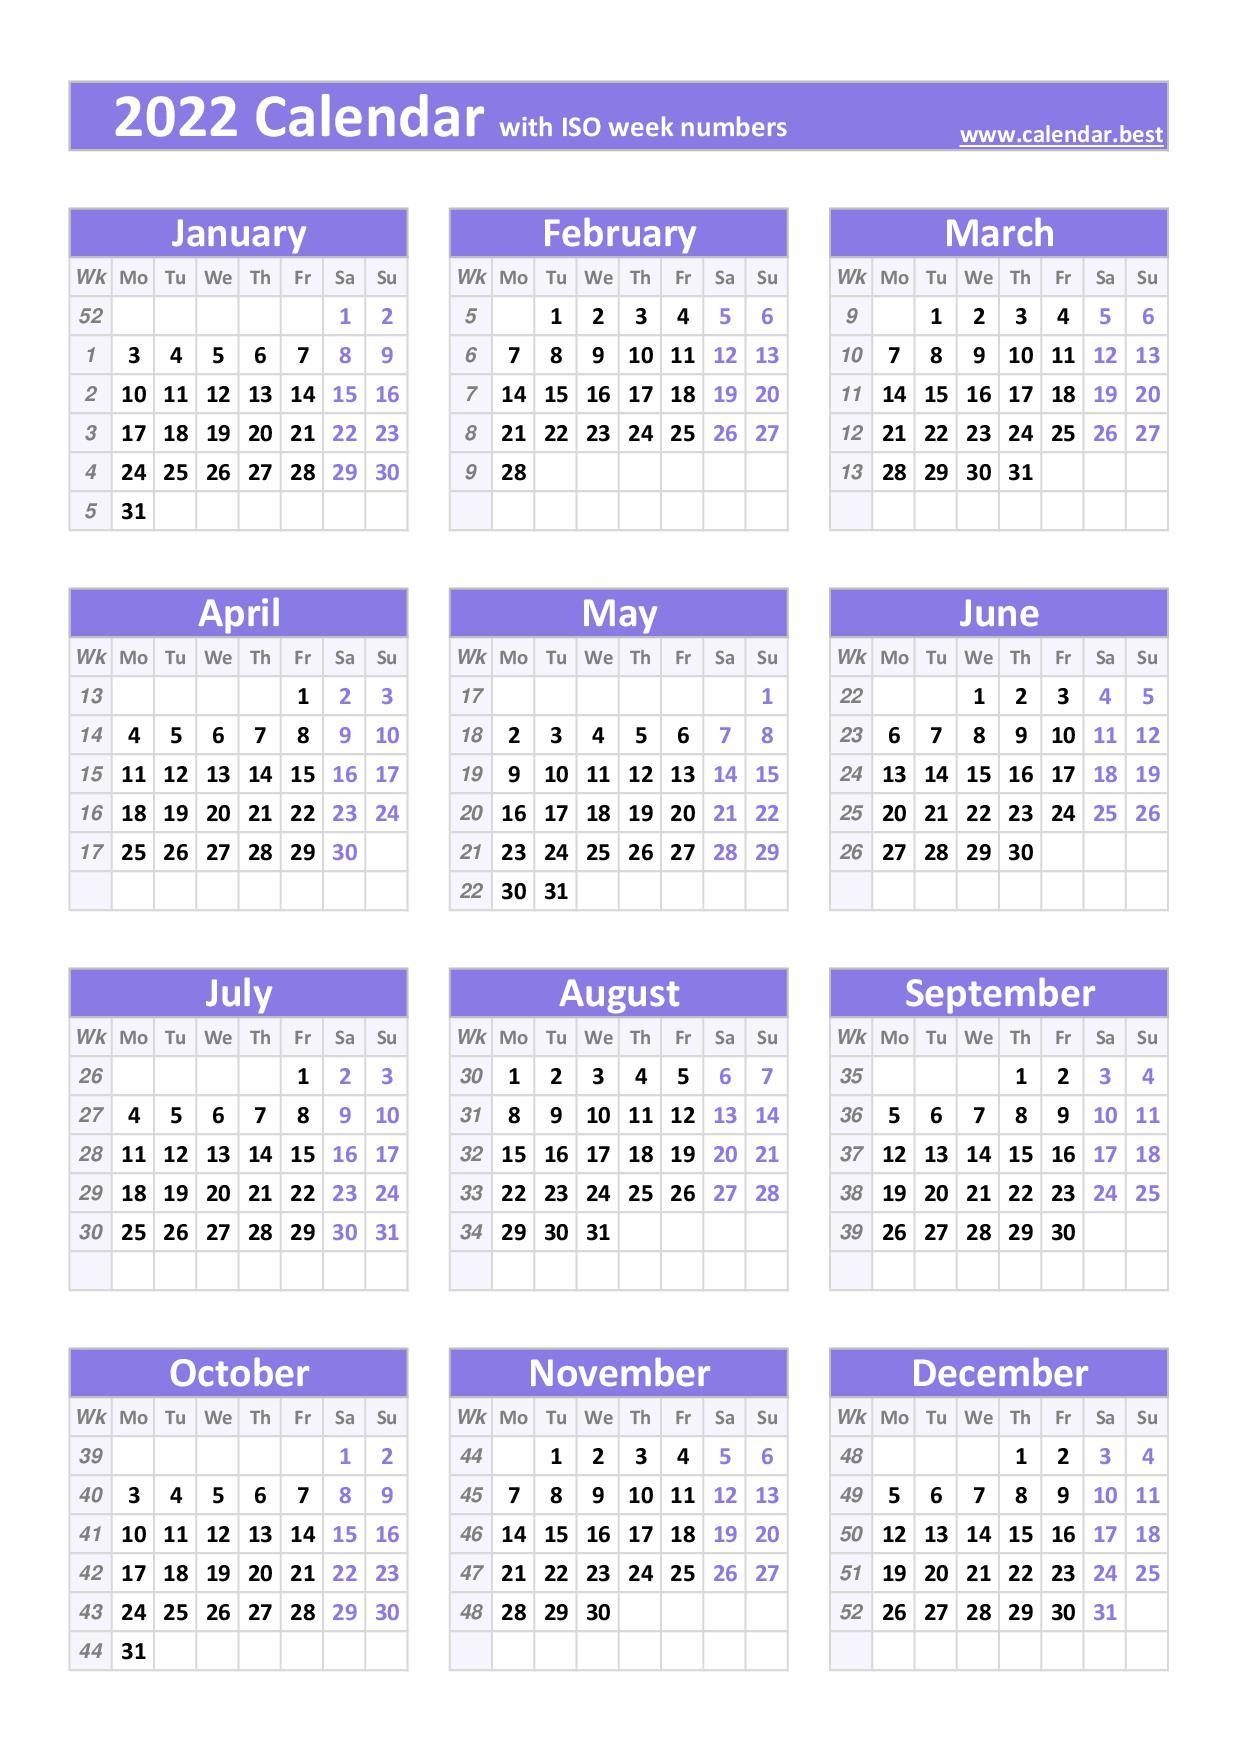 calendar-with-weeks-numbered-2022-march-calendar-2022